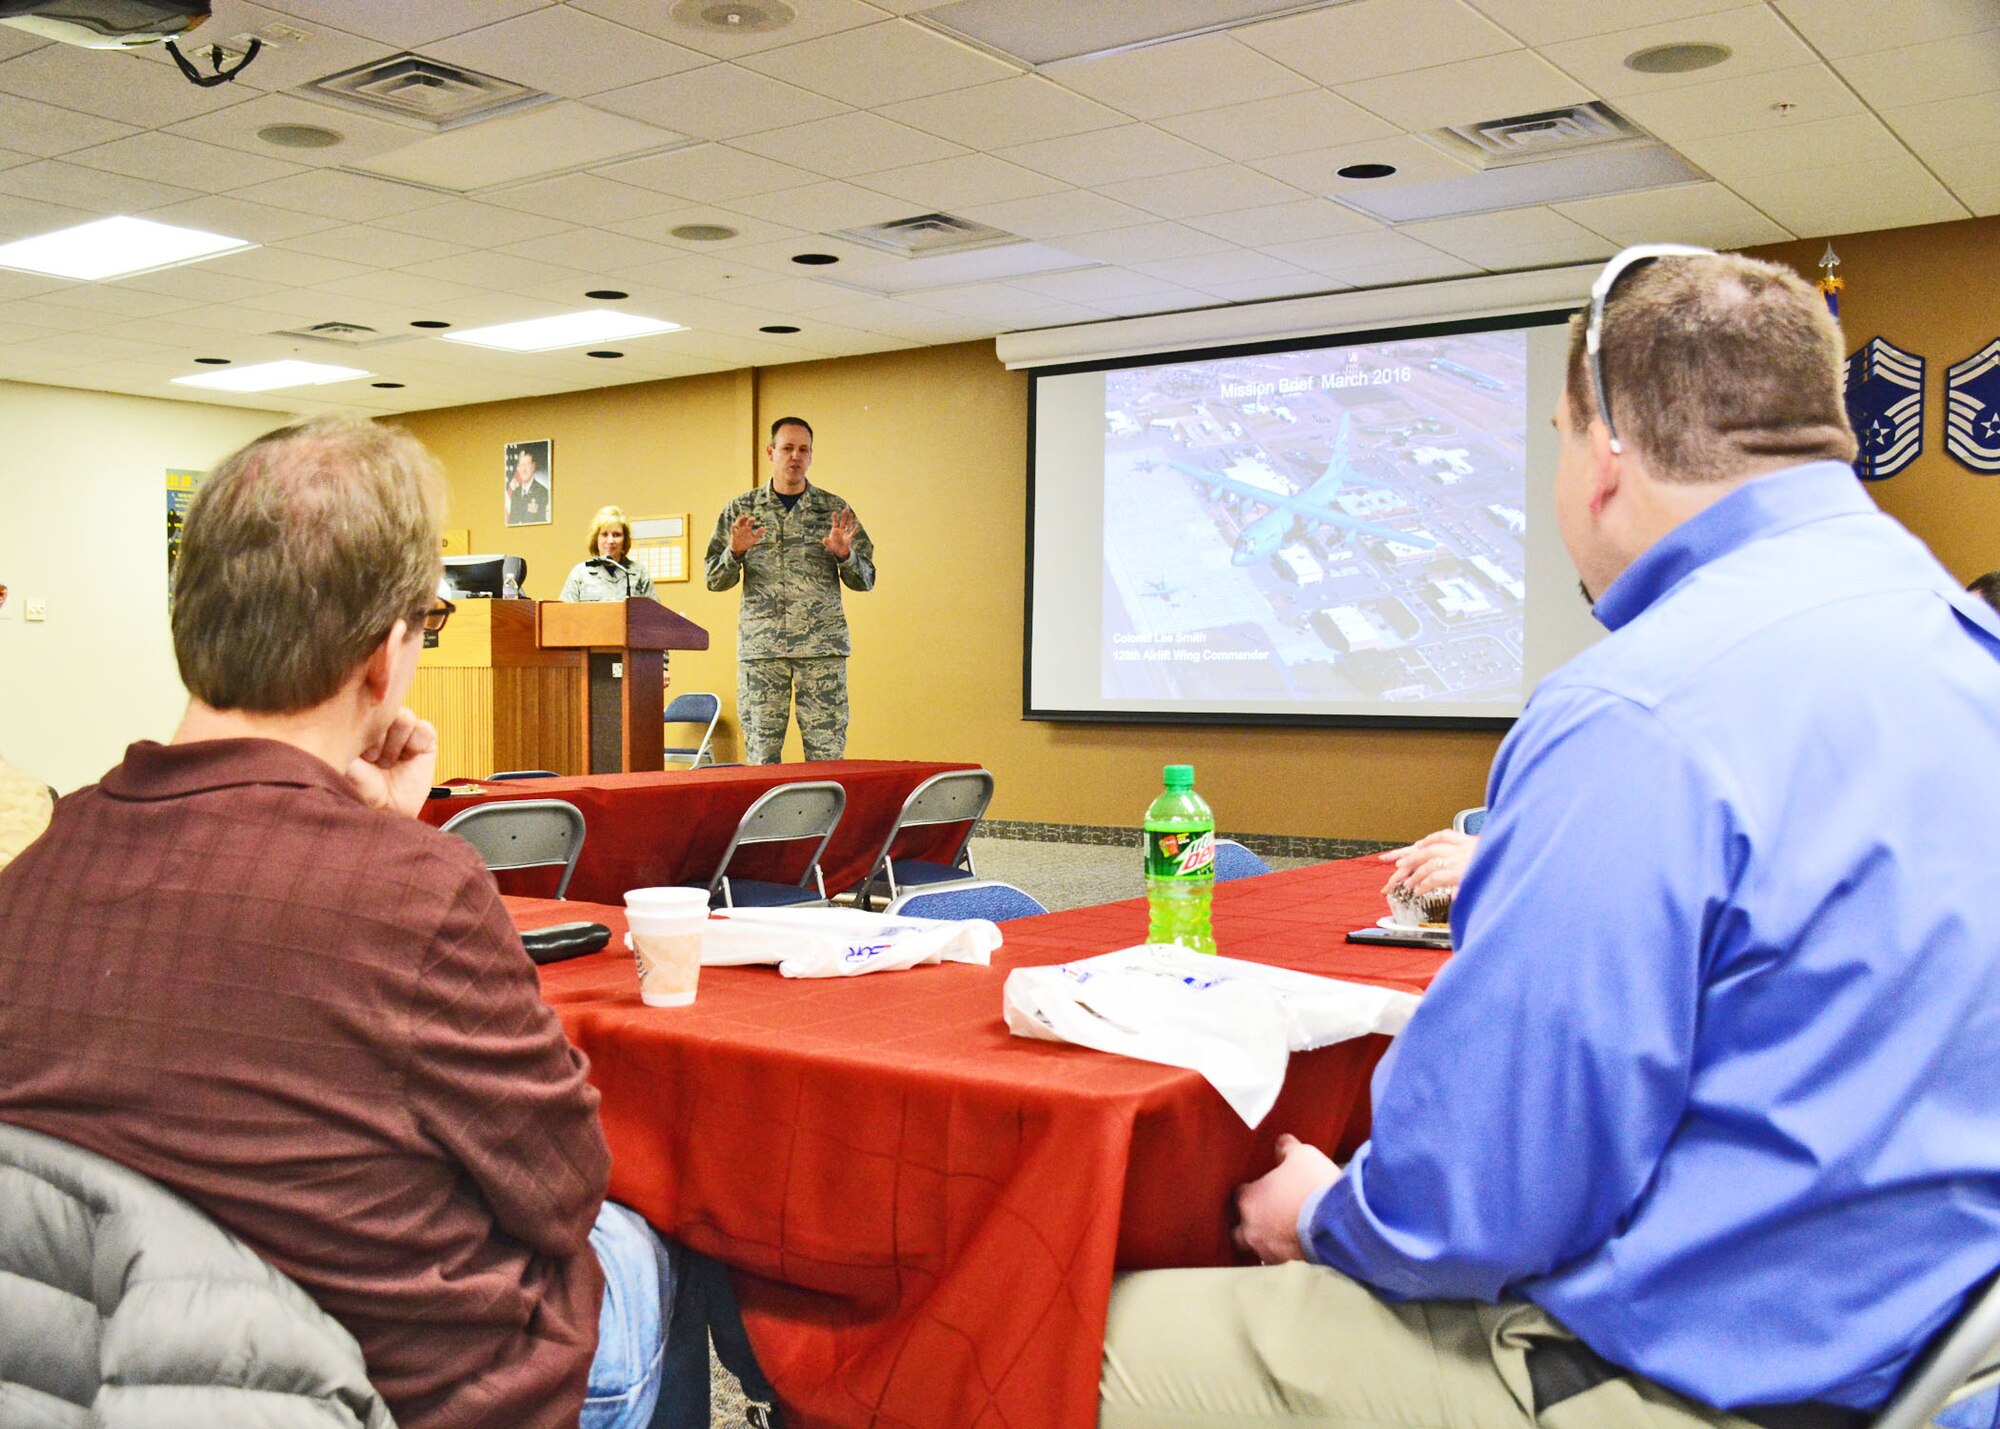 120th Airlift Wing Commander Col. Lee Smith briefs employers and community leaders during the Employer Support of the Guard and Reserve (ESGR) “Breakfast with the Boss” event held on base in Great Falls, Mont. March 5, 2016.   (U.S. Air National Guard photo by Senior Master Sgt. Eric Peterson)